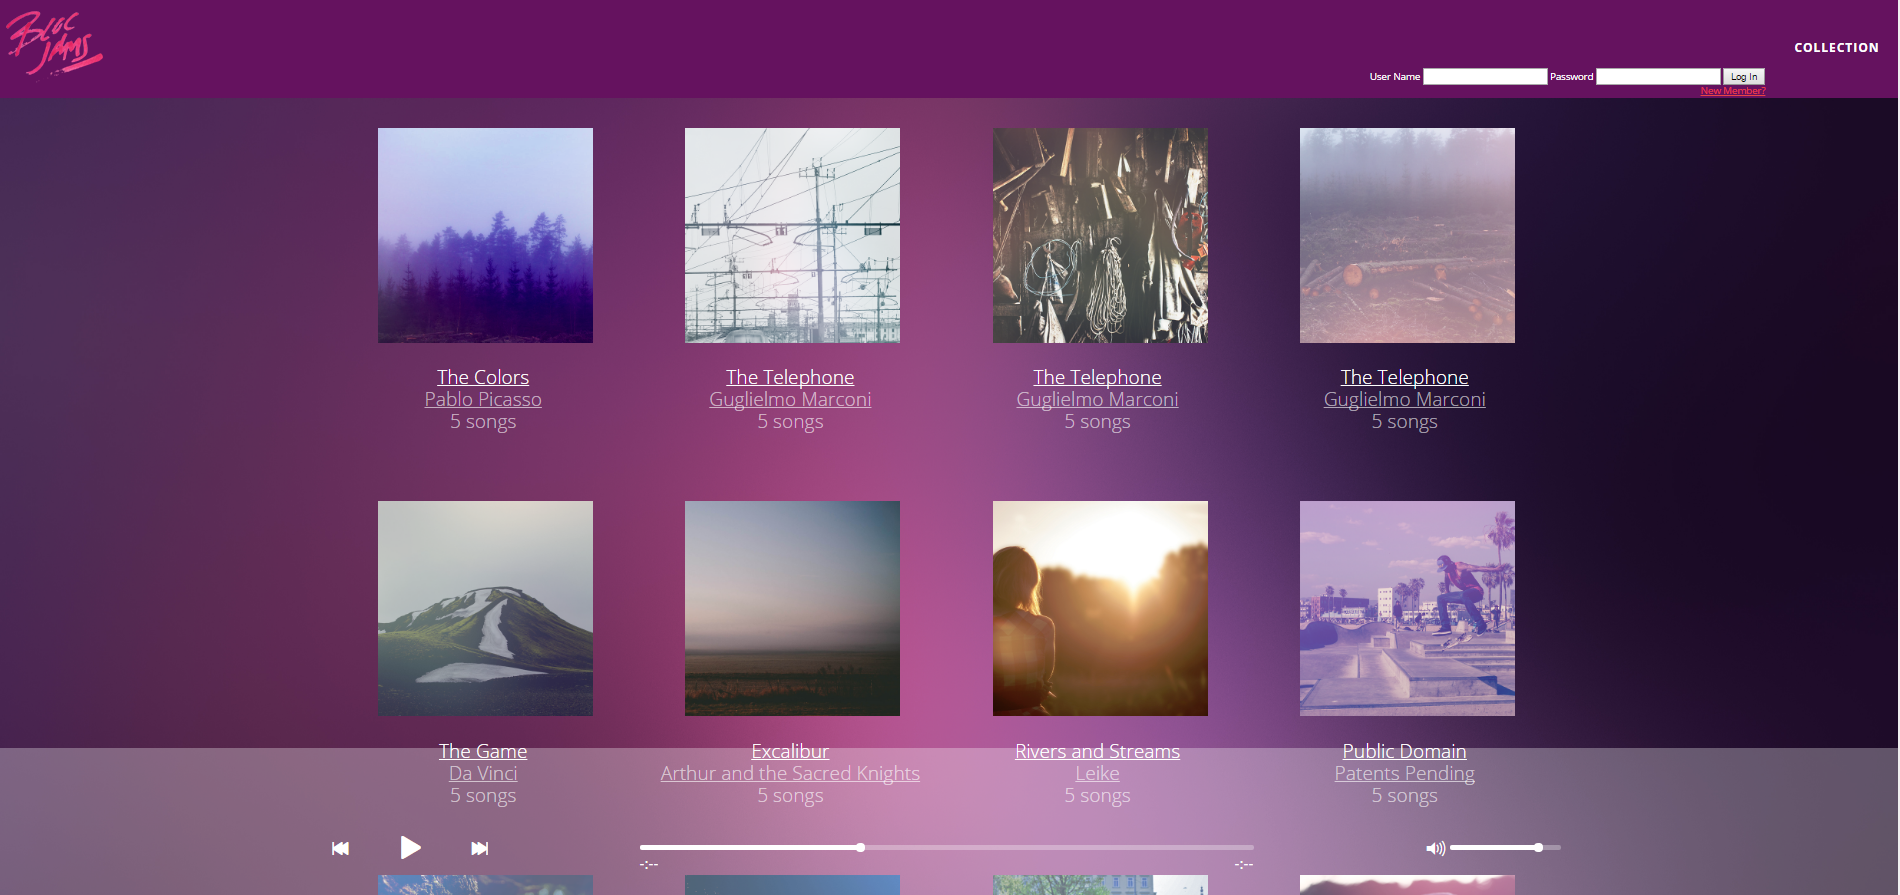 Image of Many albums in the browser